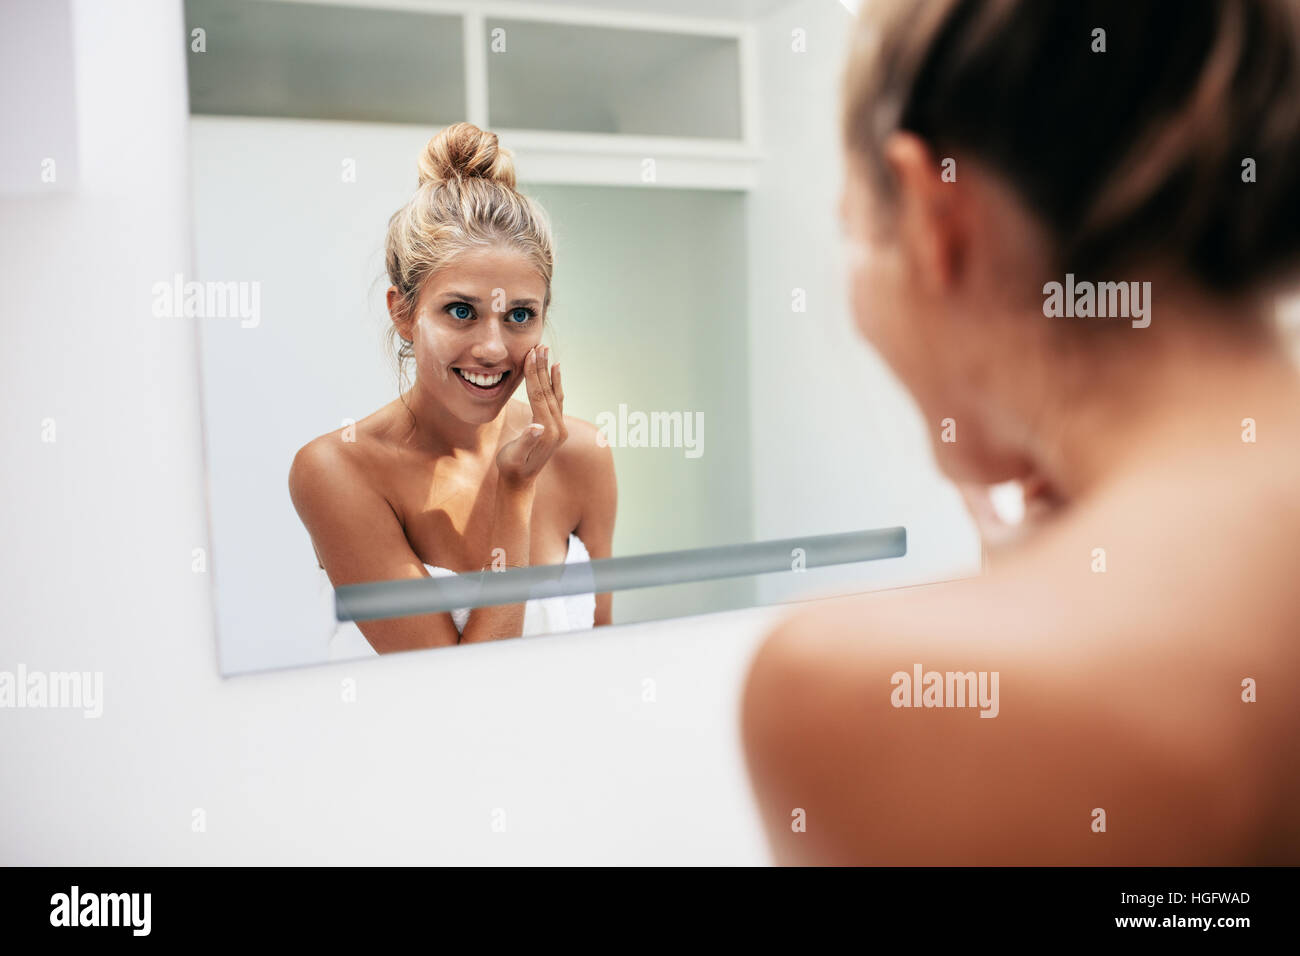 Smiling young woman reflection in mirror applying face cream in bathroom. Caucasian female doing beauty treatment at home. Stock Photo